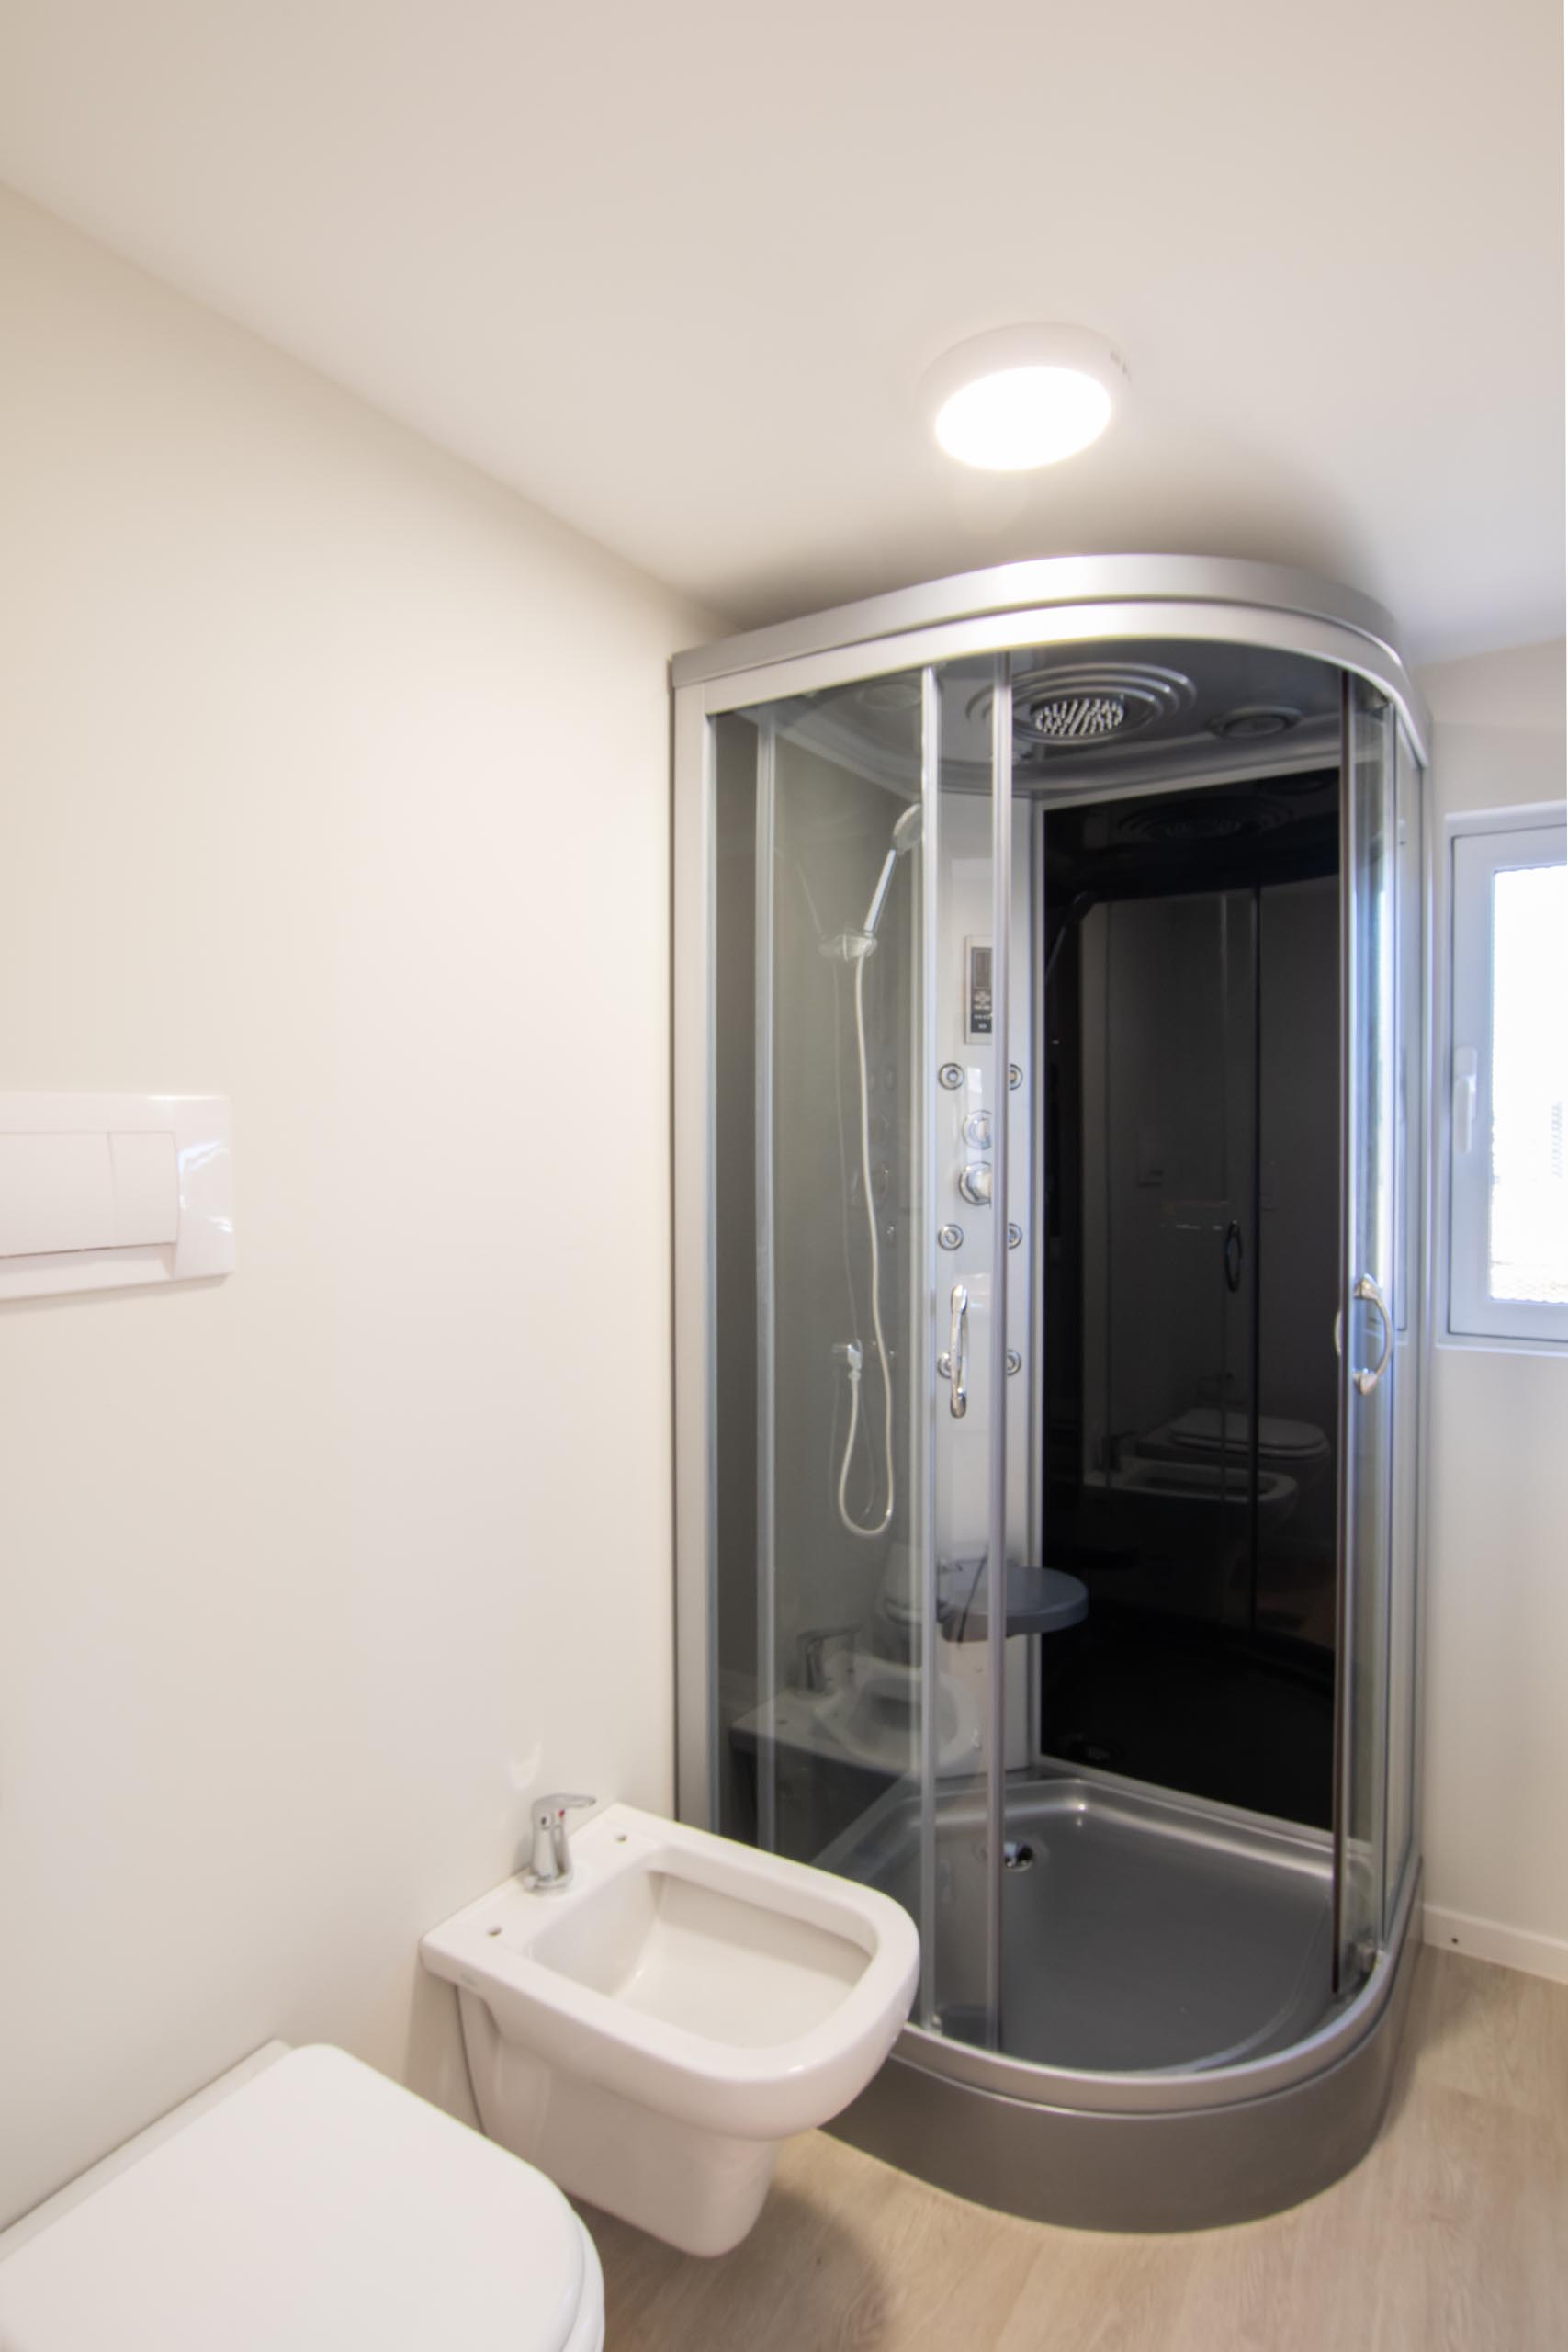 A modern tiny home with a toilet, bidet, and shower.